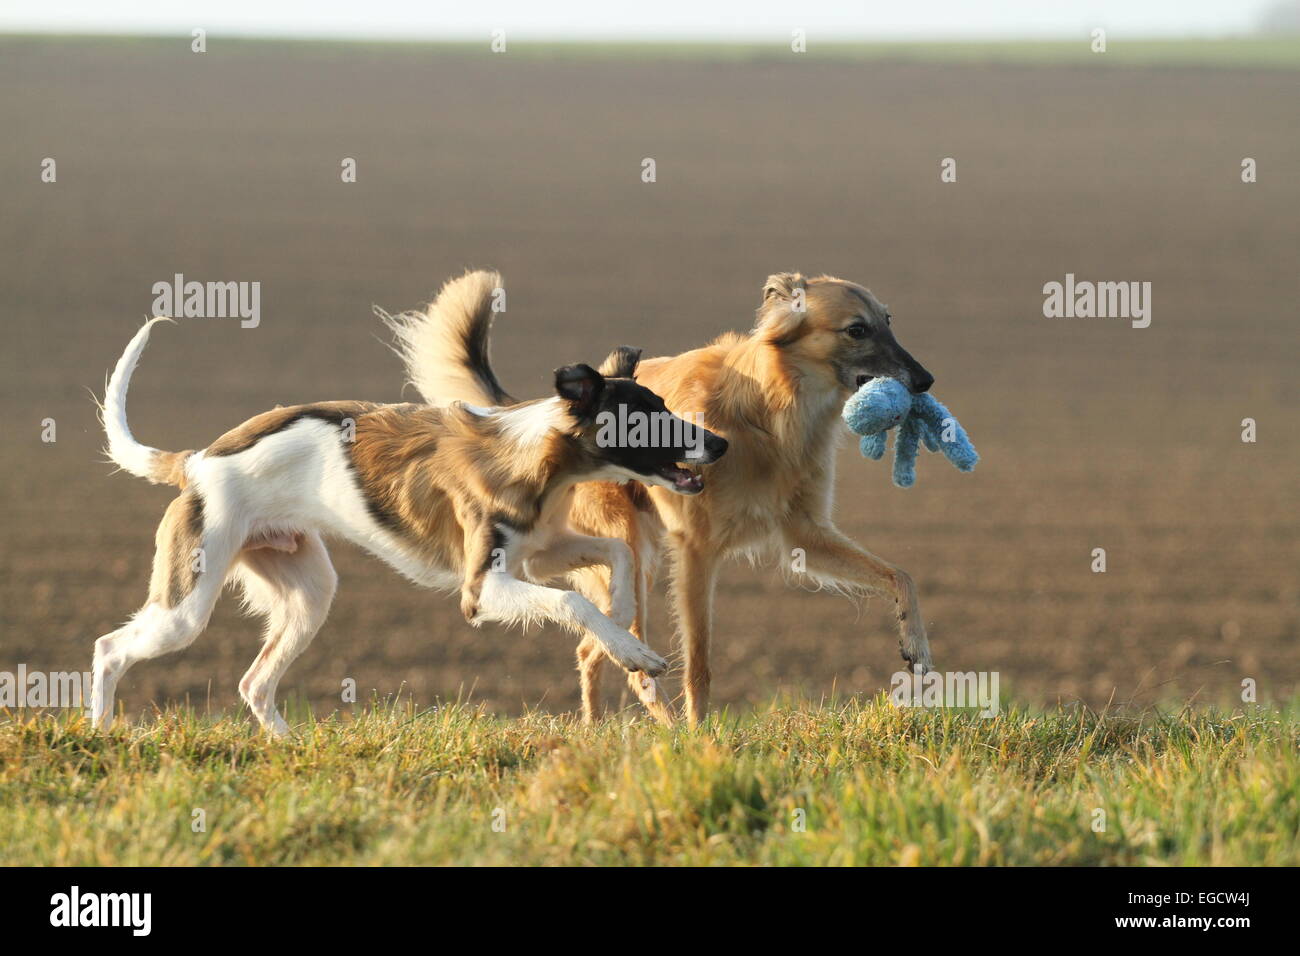 Silken Windsprite dogs, whippets, at play Stock Photo